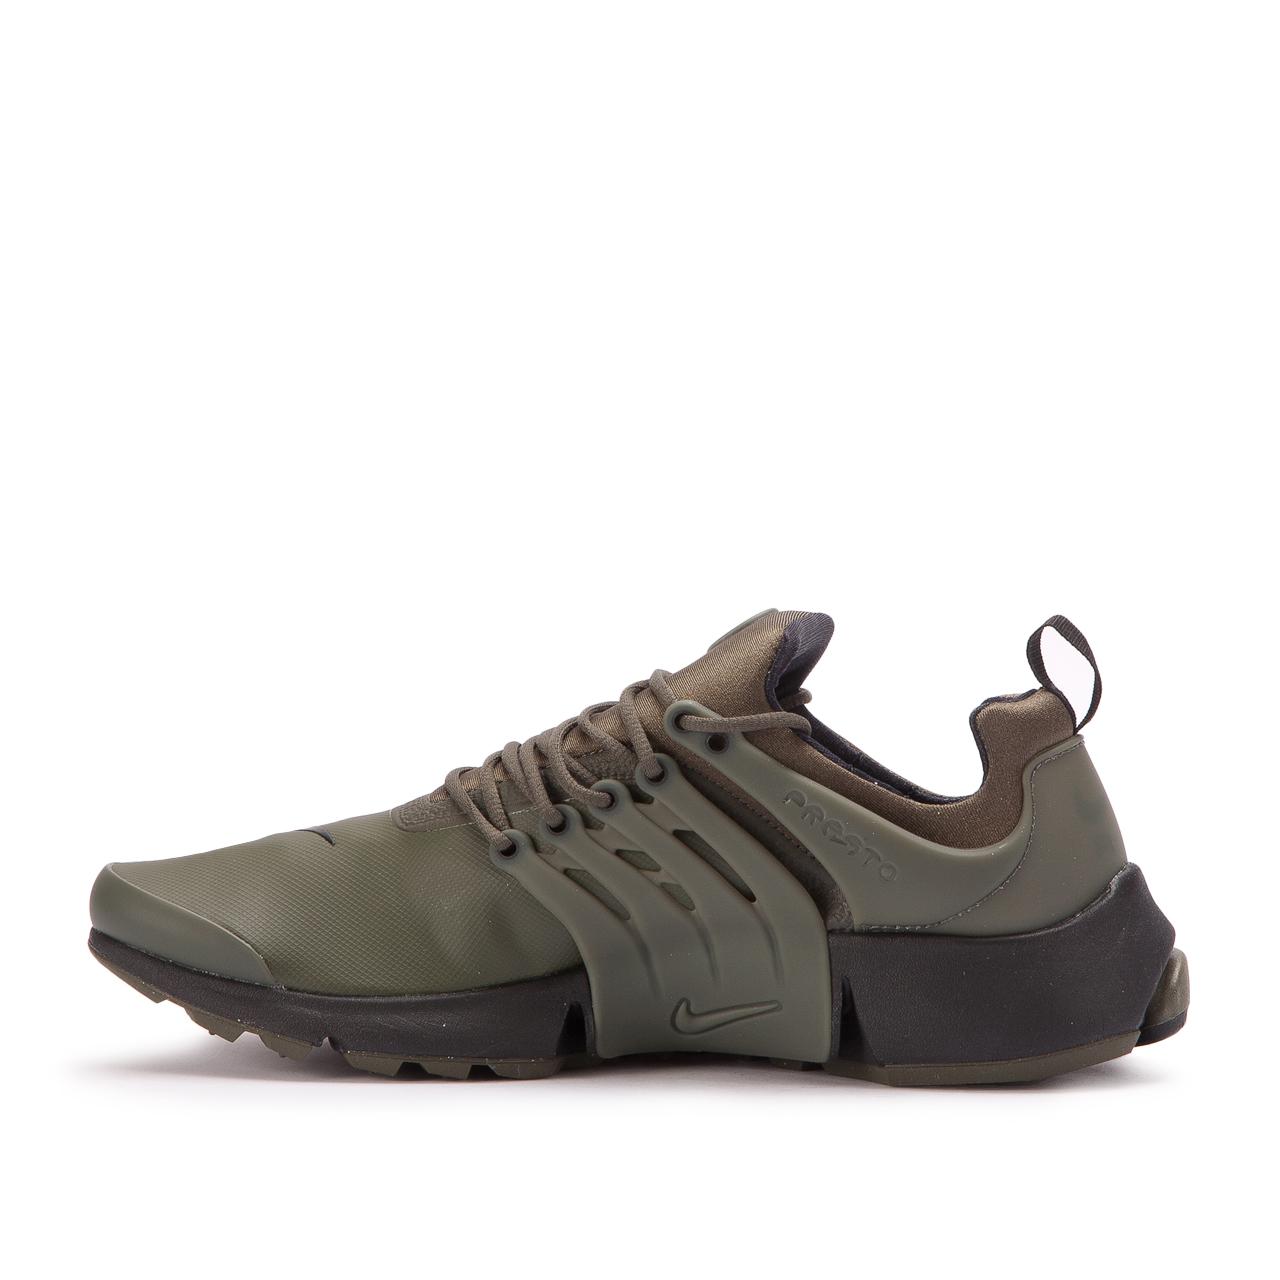 Nike Synthetic Nike Air Presto Low Utility in Olive (Green) for Men - Lyst